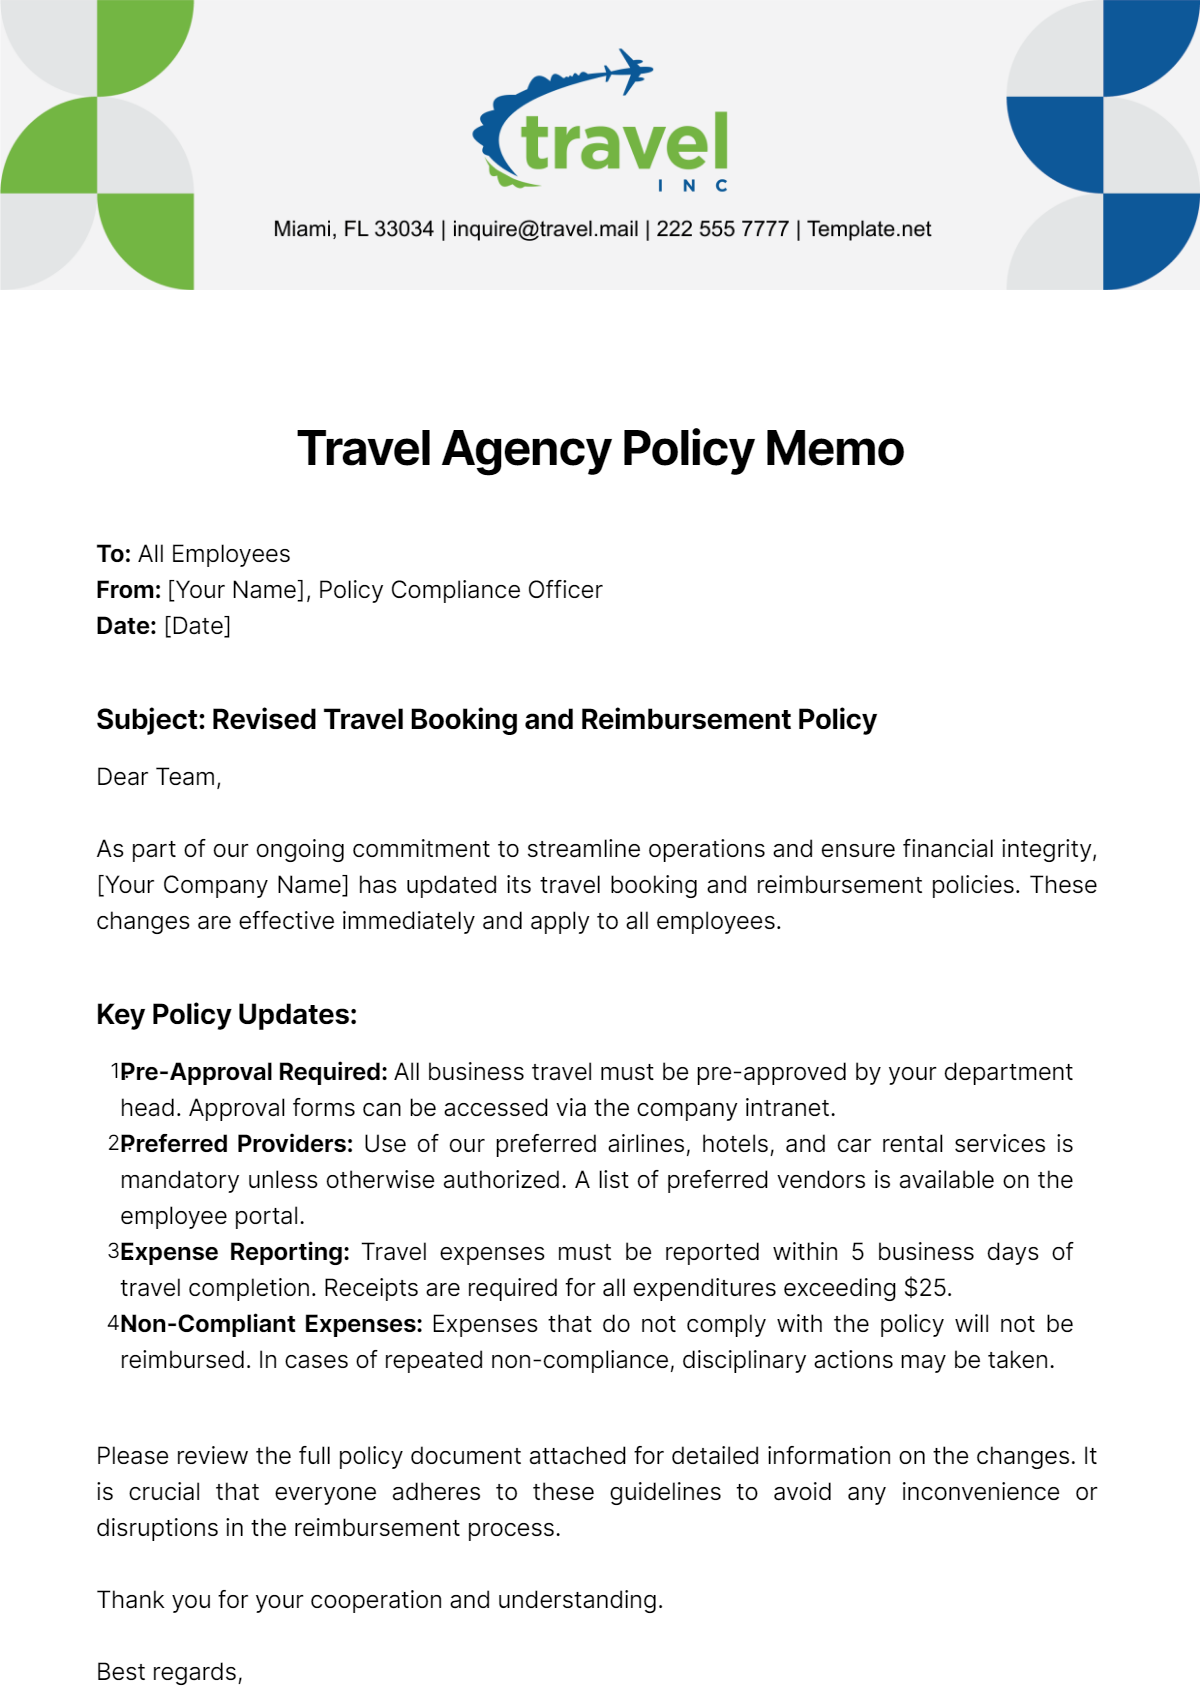 Travel Agency Policy Memo Template